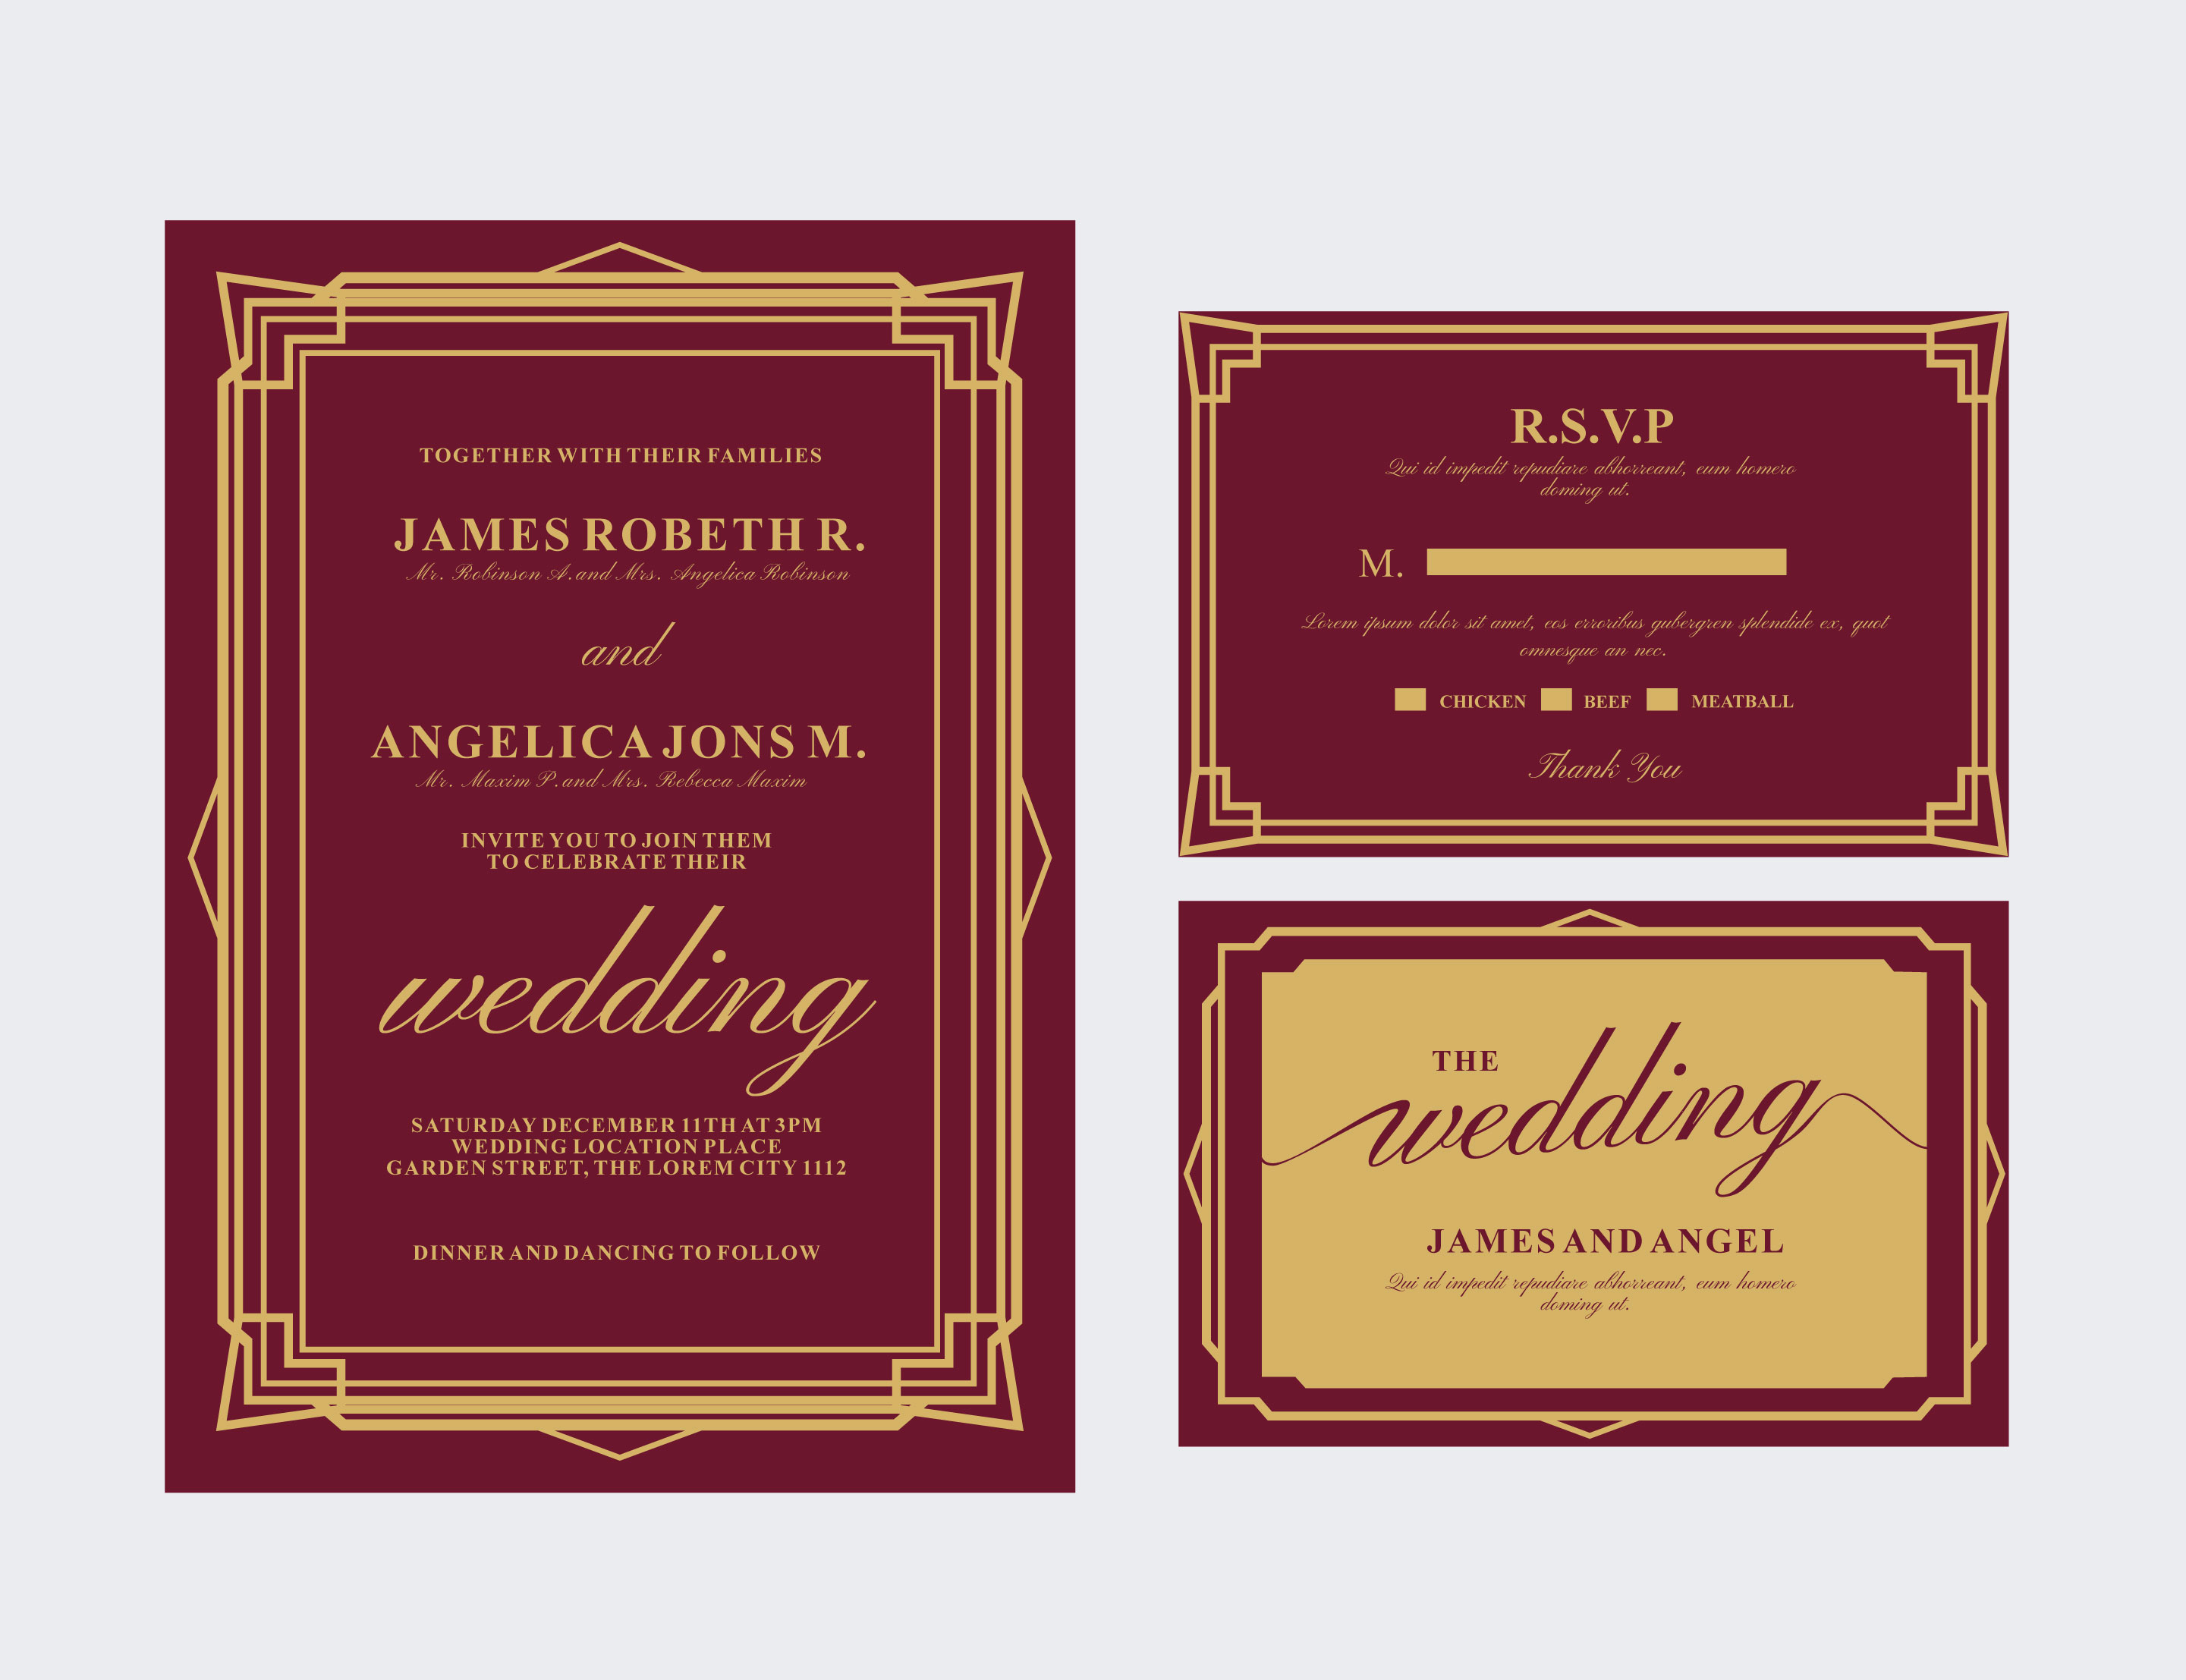 Indian Wedding Card Free Vector Art – (418 Free Downloads) With Indian Wedding Cards Design Templates